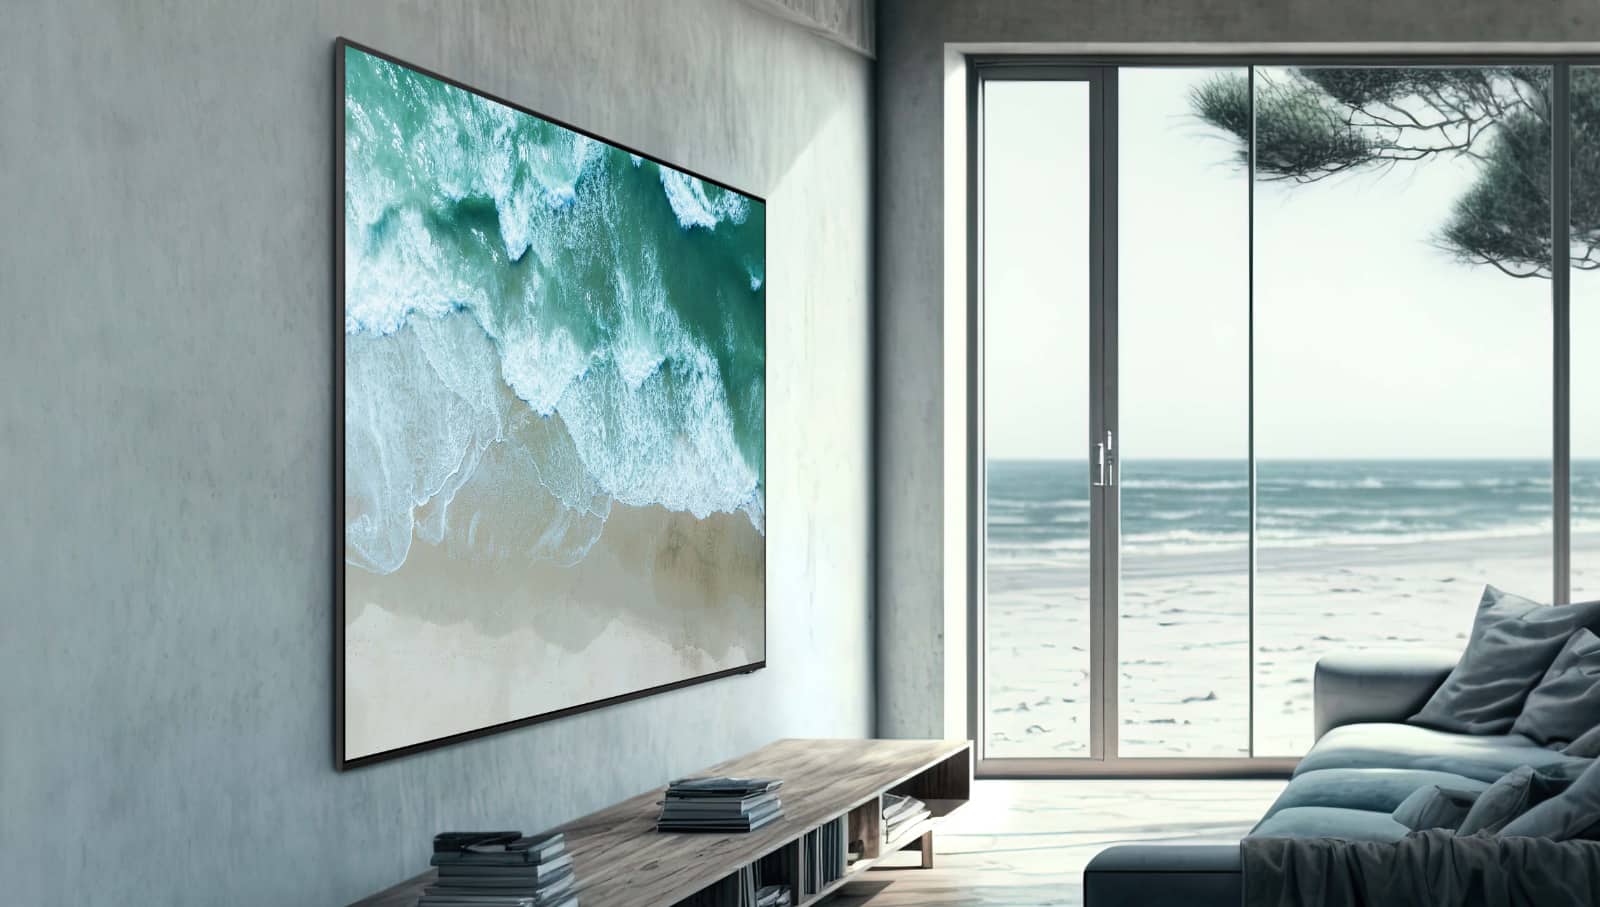 Samsung Goes Big with 2023 Neo QLED 8K and 4K TVs, Rolling Out Now